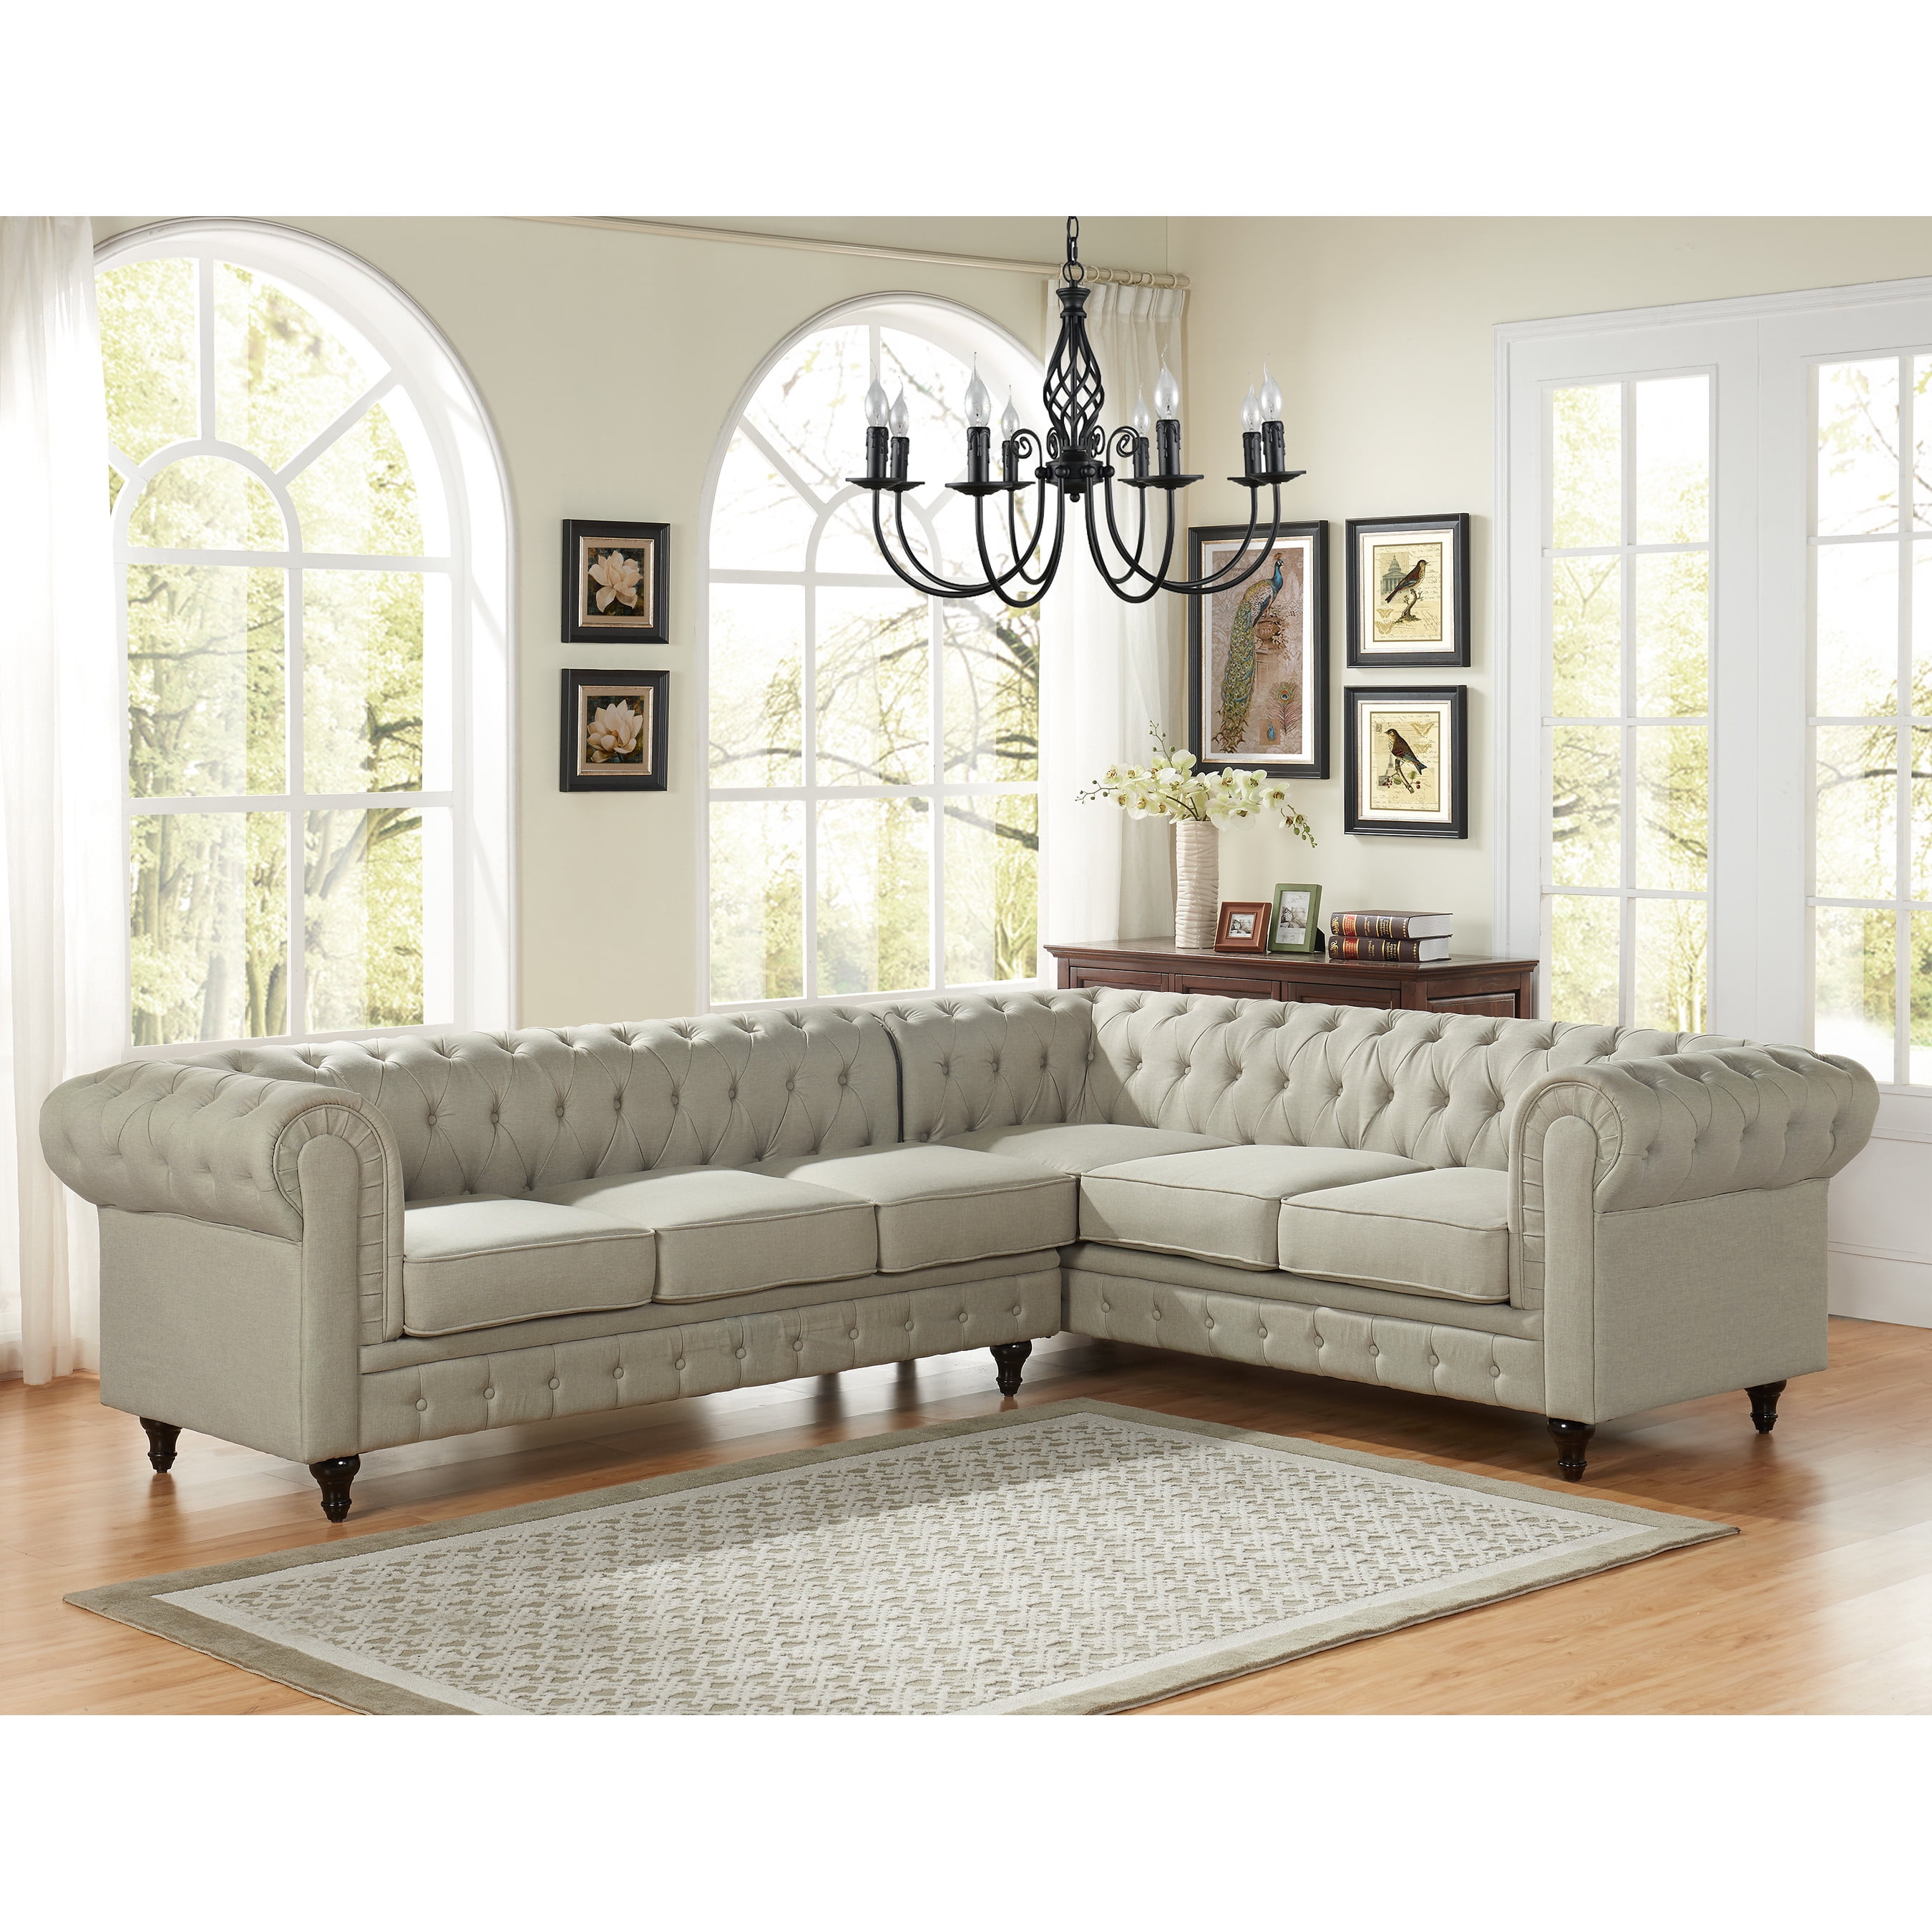 2PC Beige US Pride Furniture Sectional